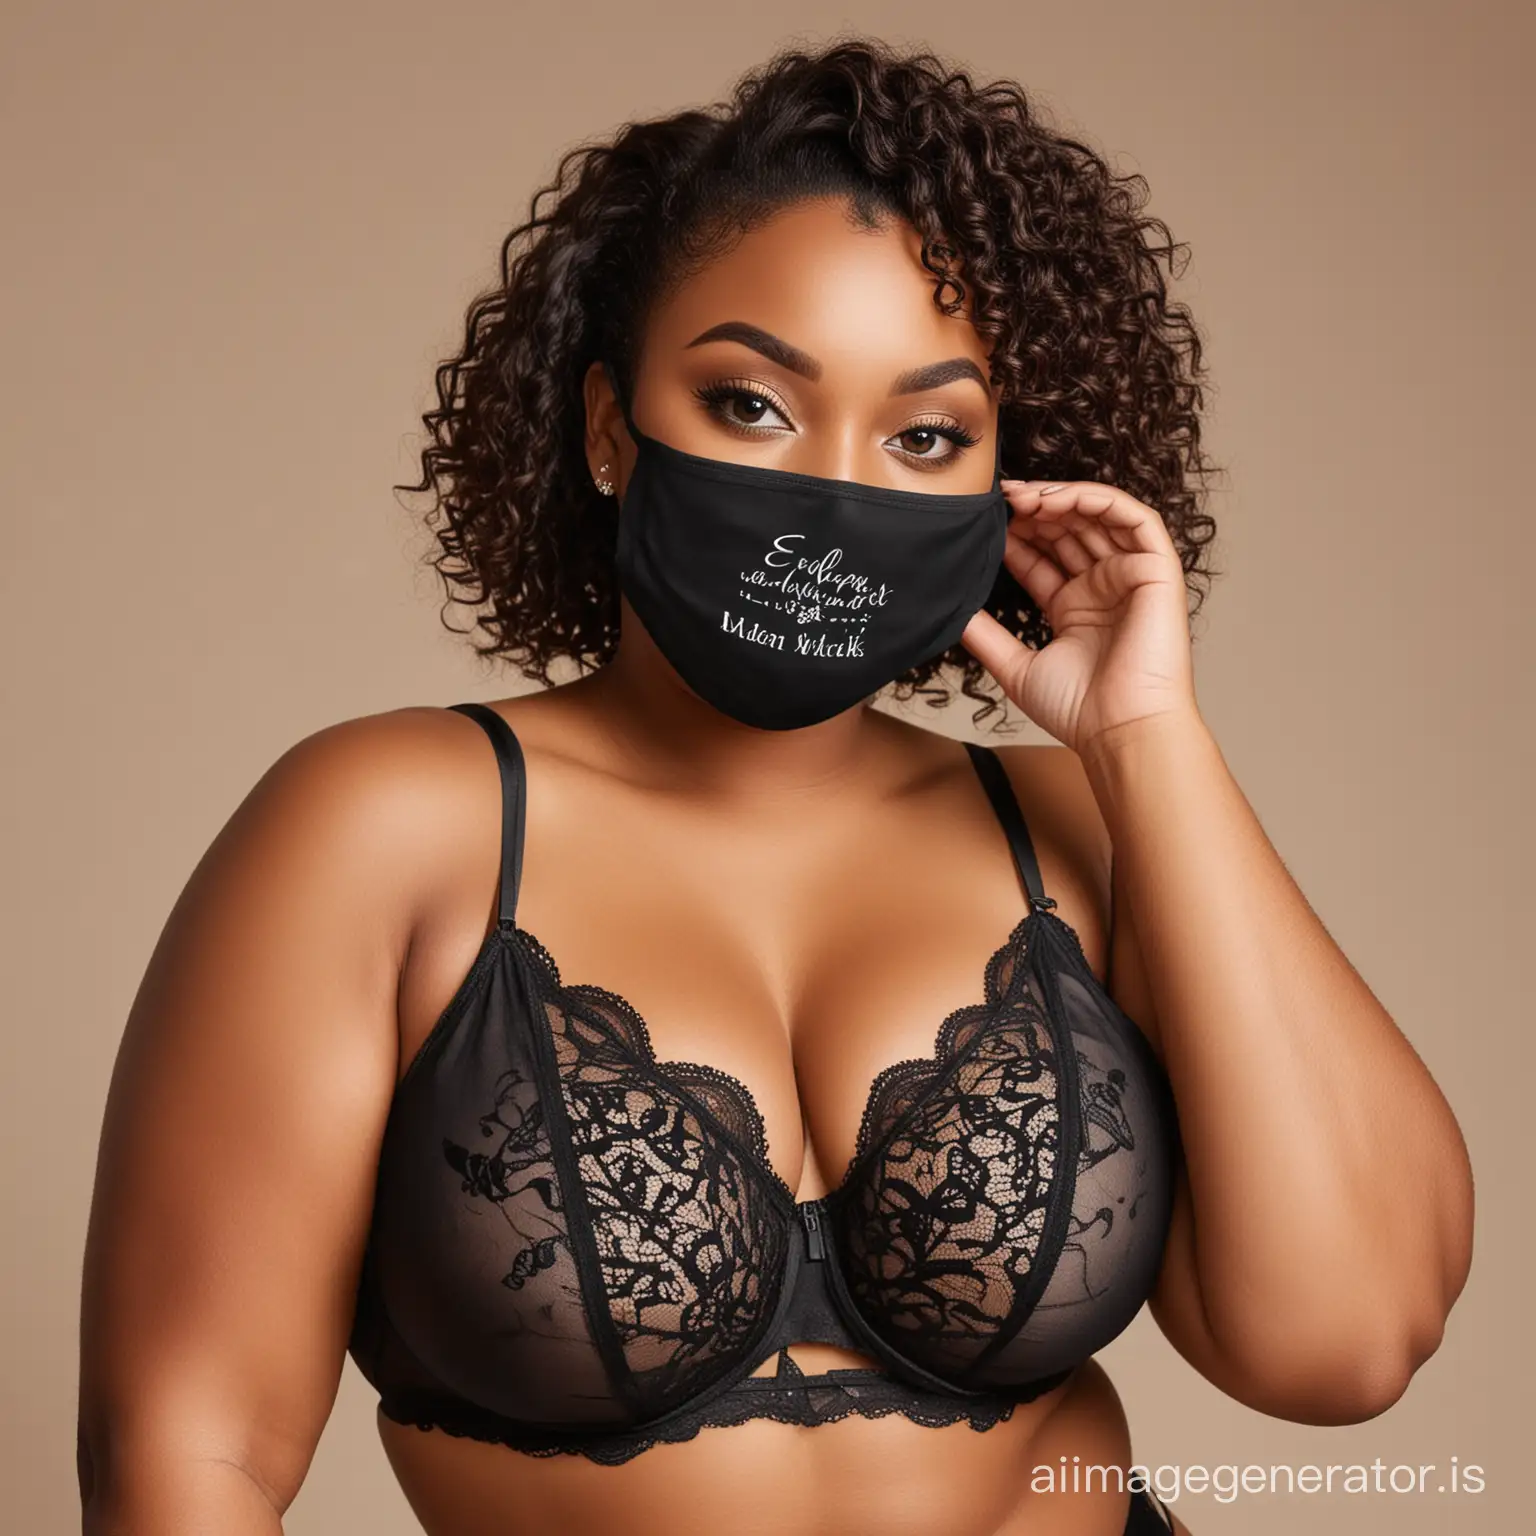 Sensual-Curvy-Black-Woman-Logo-with-Masked-Charm-in-Used-Lingerie